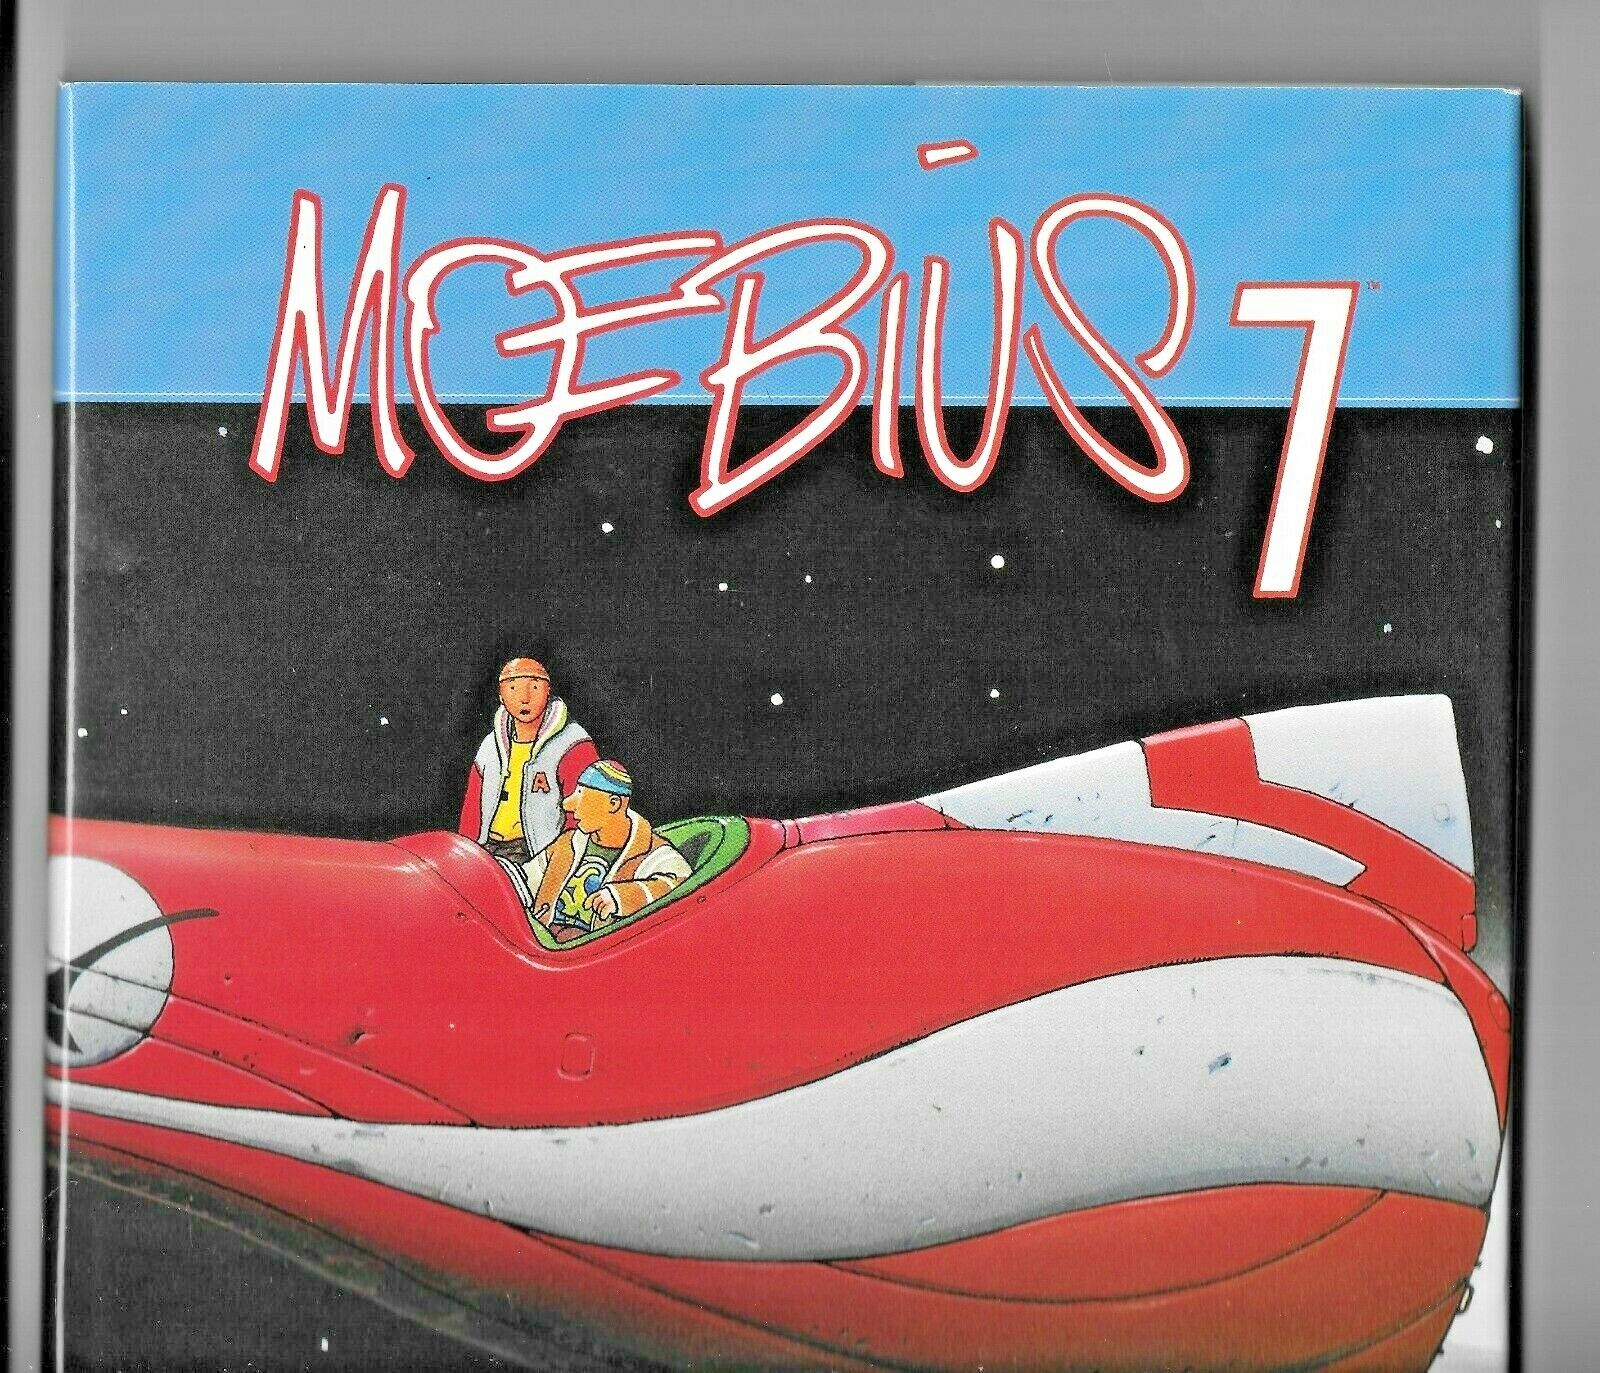 Moebius 7 Early, Horny Goof 1990 Signed 885/1500 LE HC 208 pp VF Heavy Metal Art